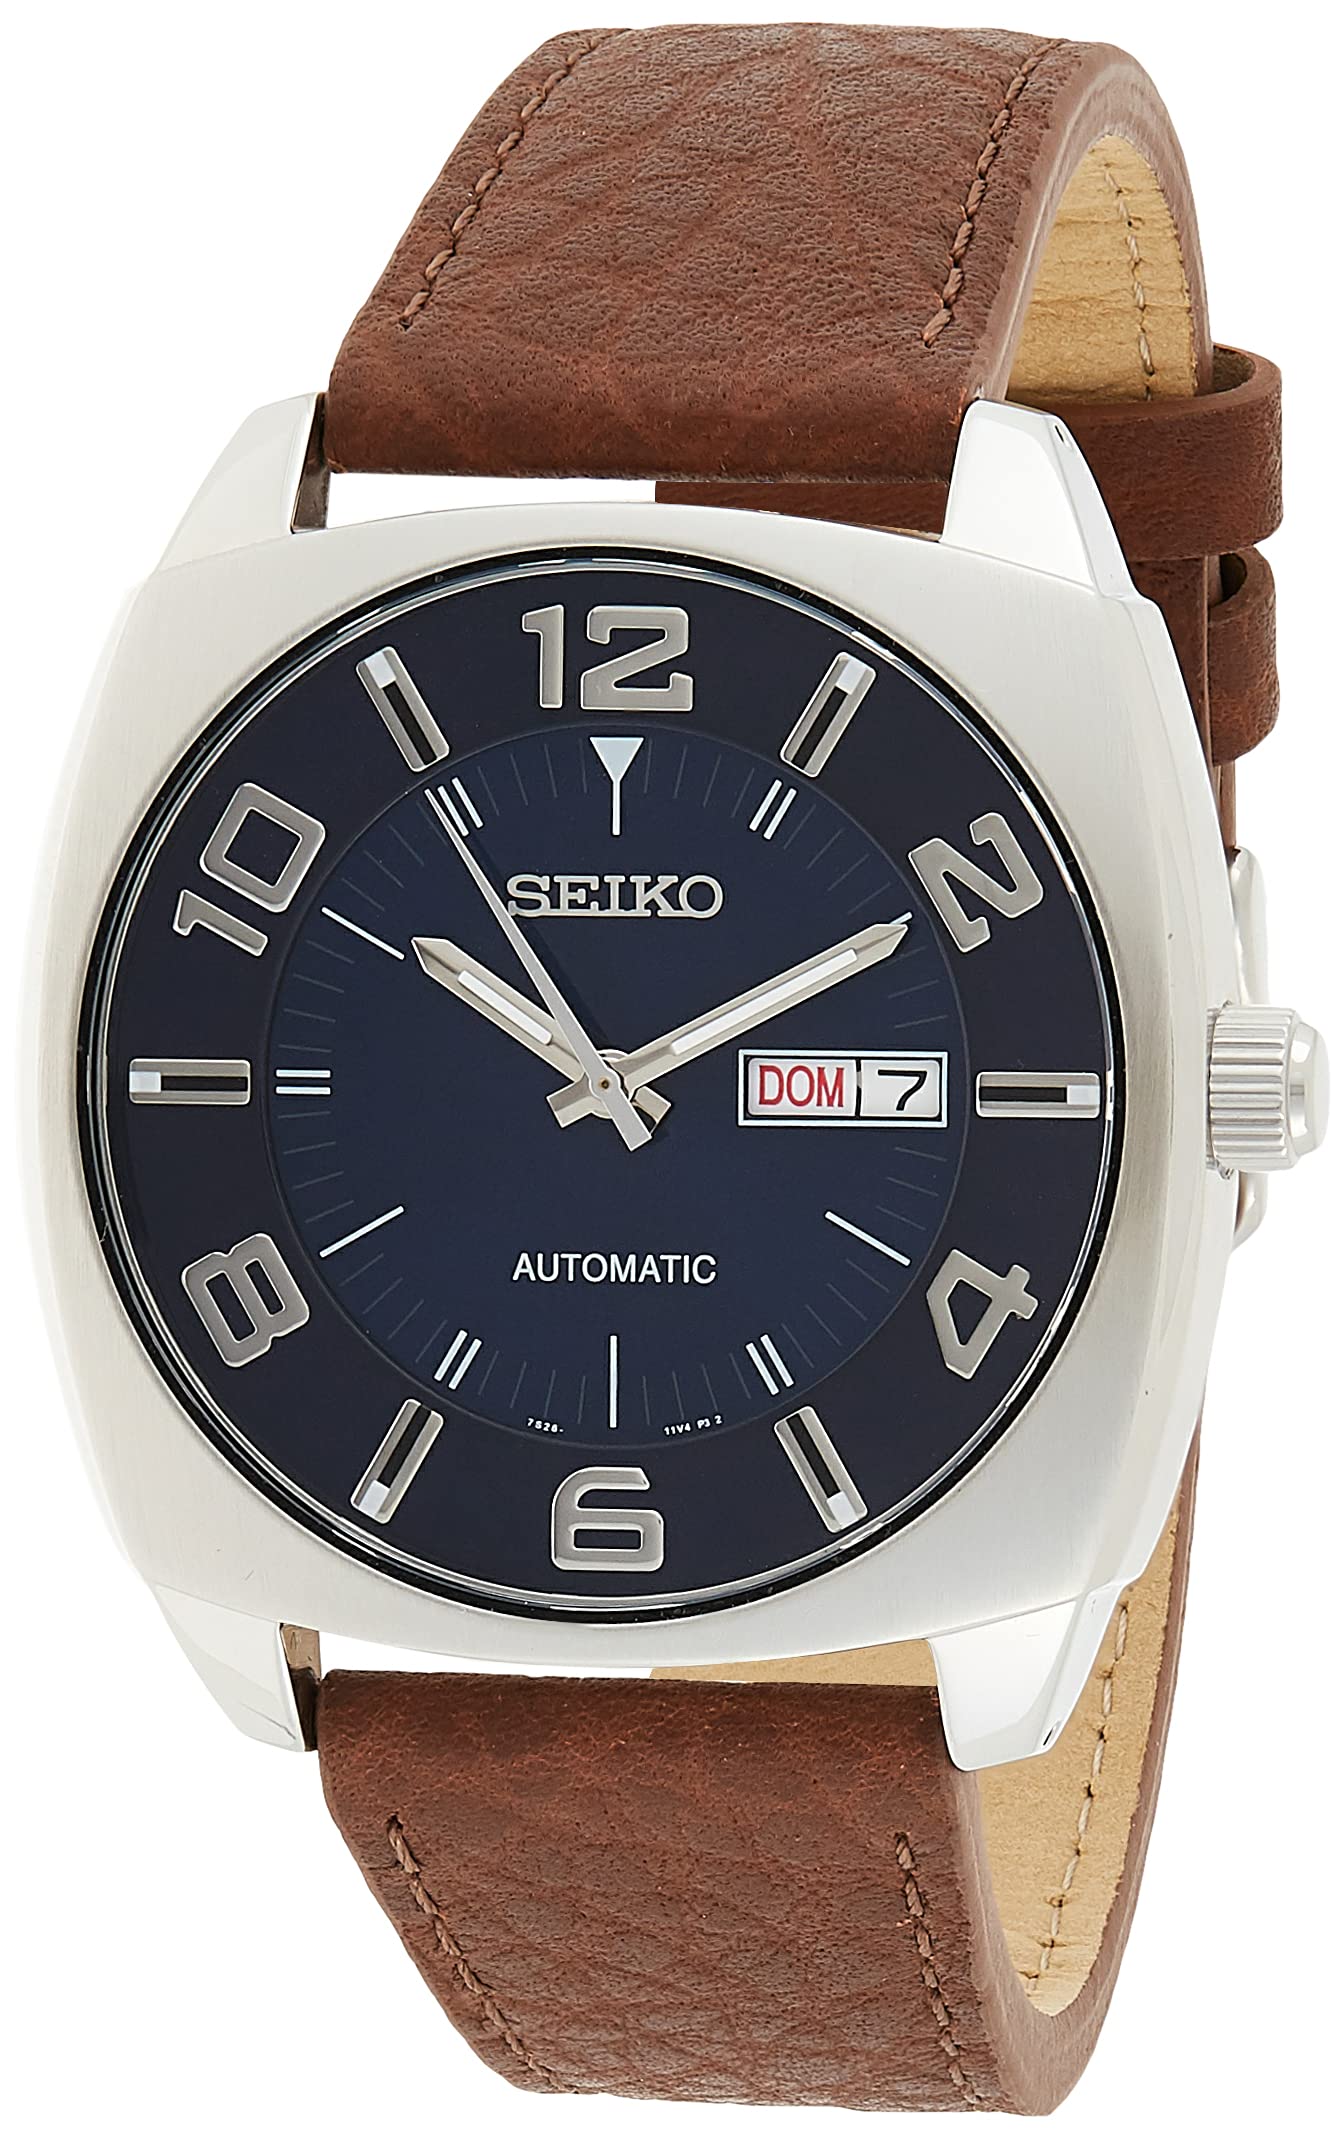 Seiko SNKN37 Automatic Watch on Leather Strap $99 + free s/h at Amazon